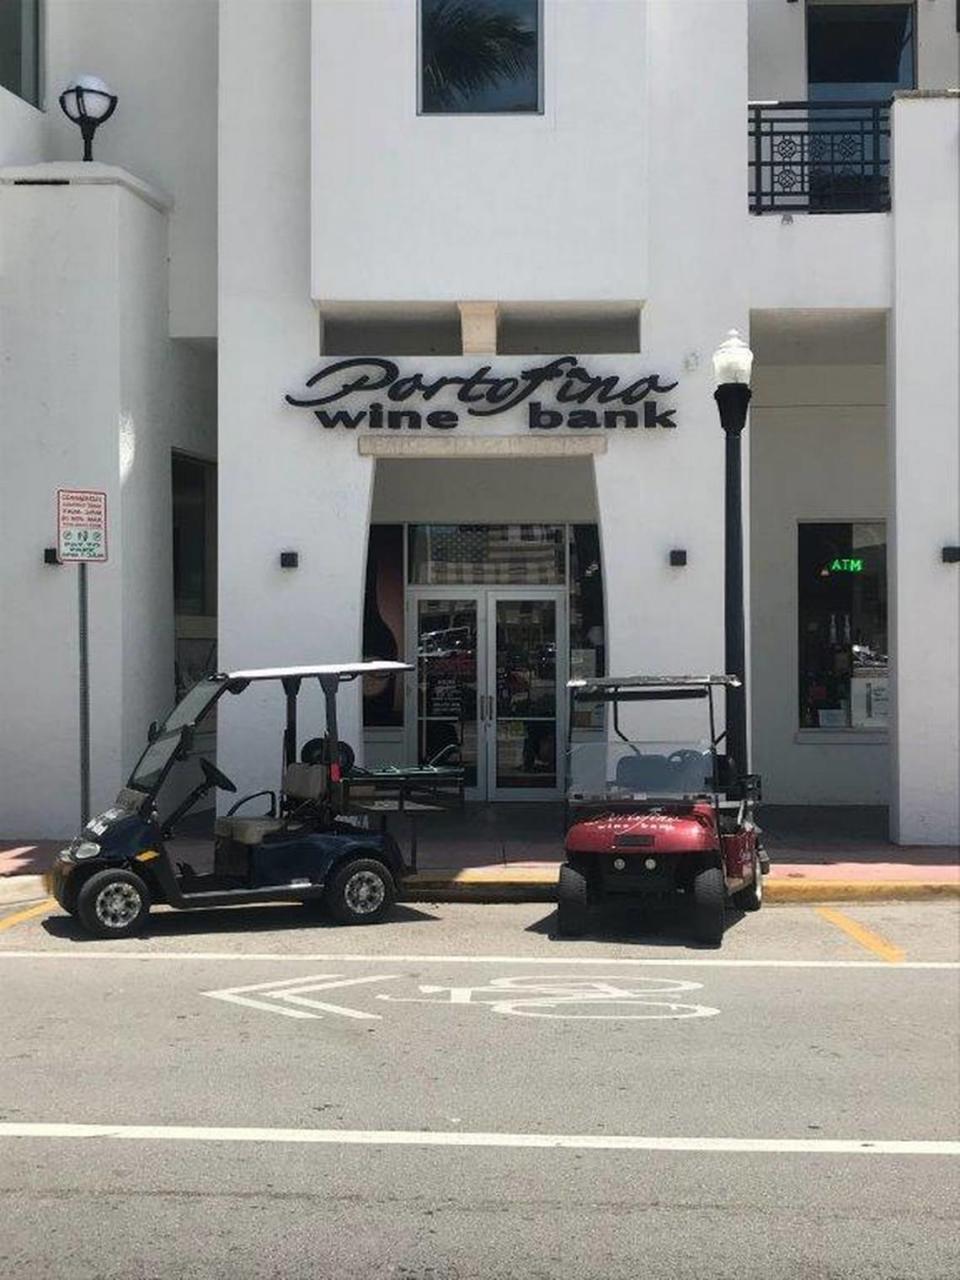 Portofino Wine Bank, at 500 South Pointe Drive in South Beach, opened past 8 p.m. Tuesday after the city of Miami Beach lifted its restriction on retail alcohol sales.